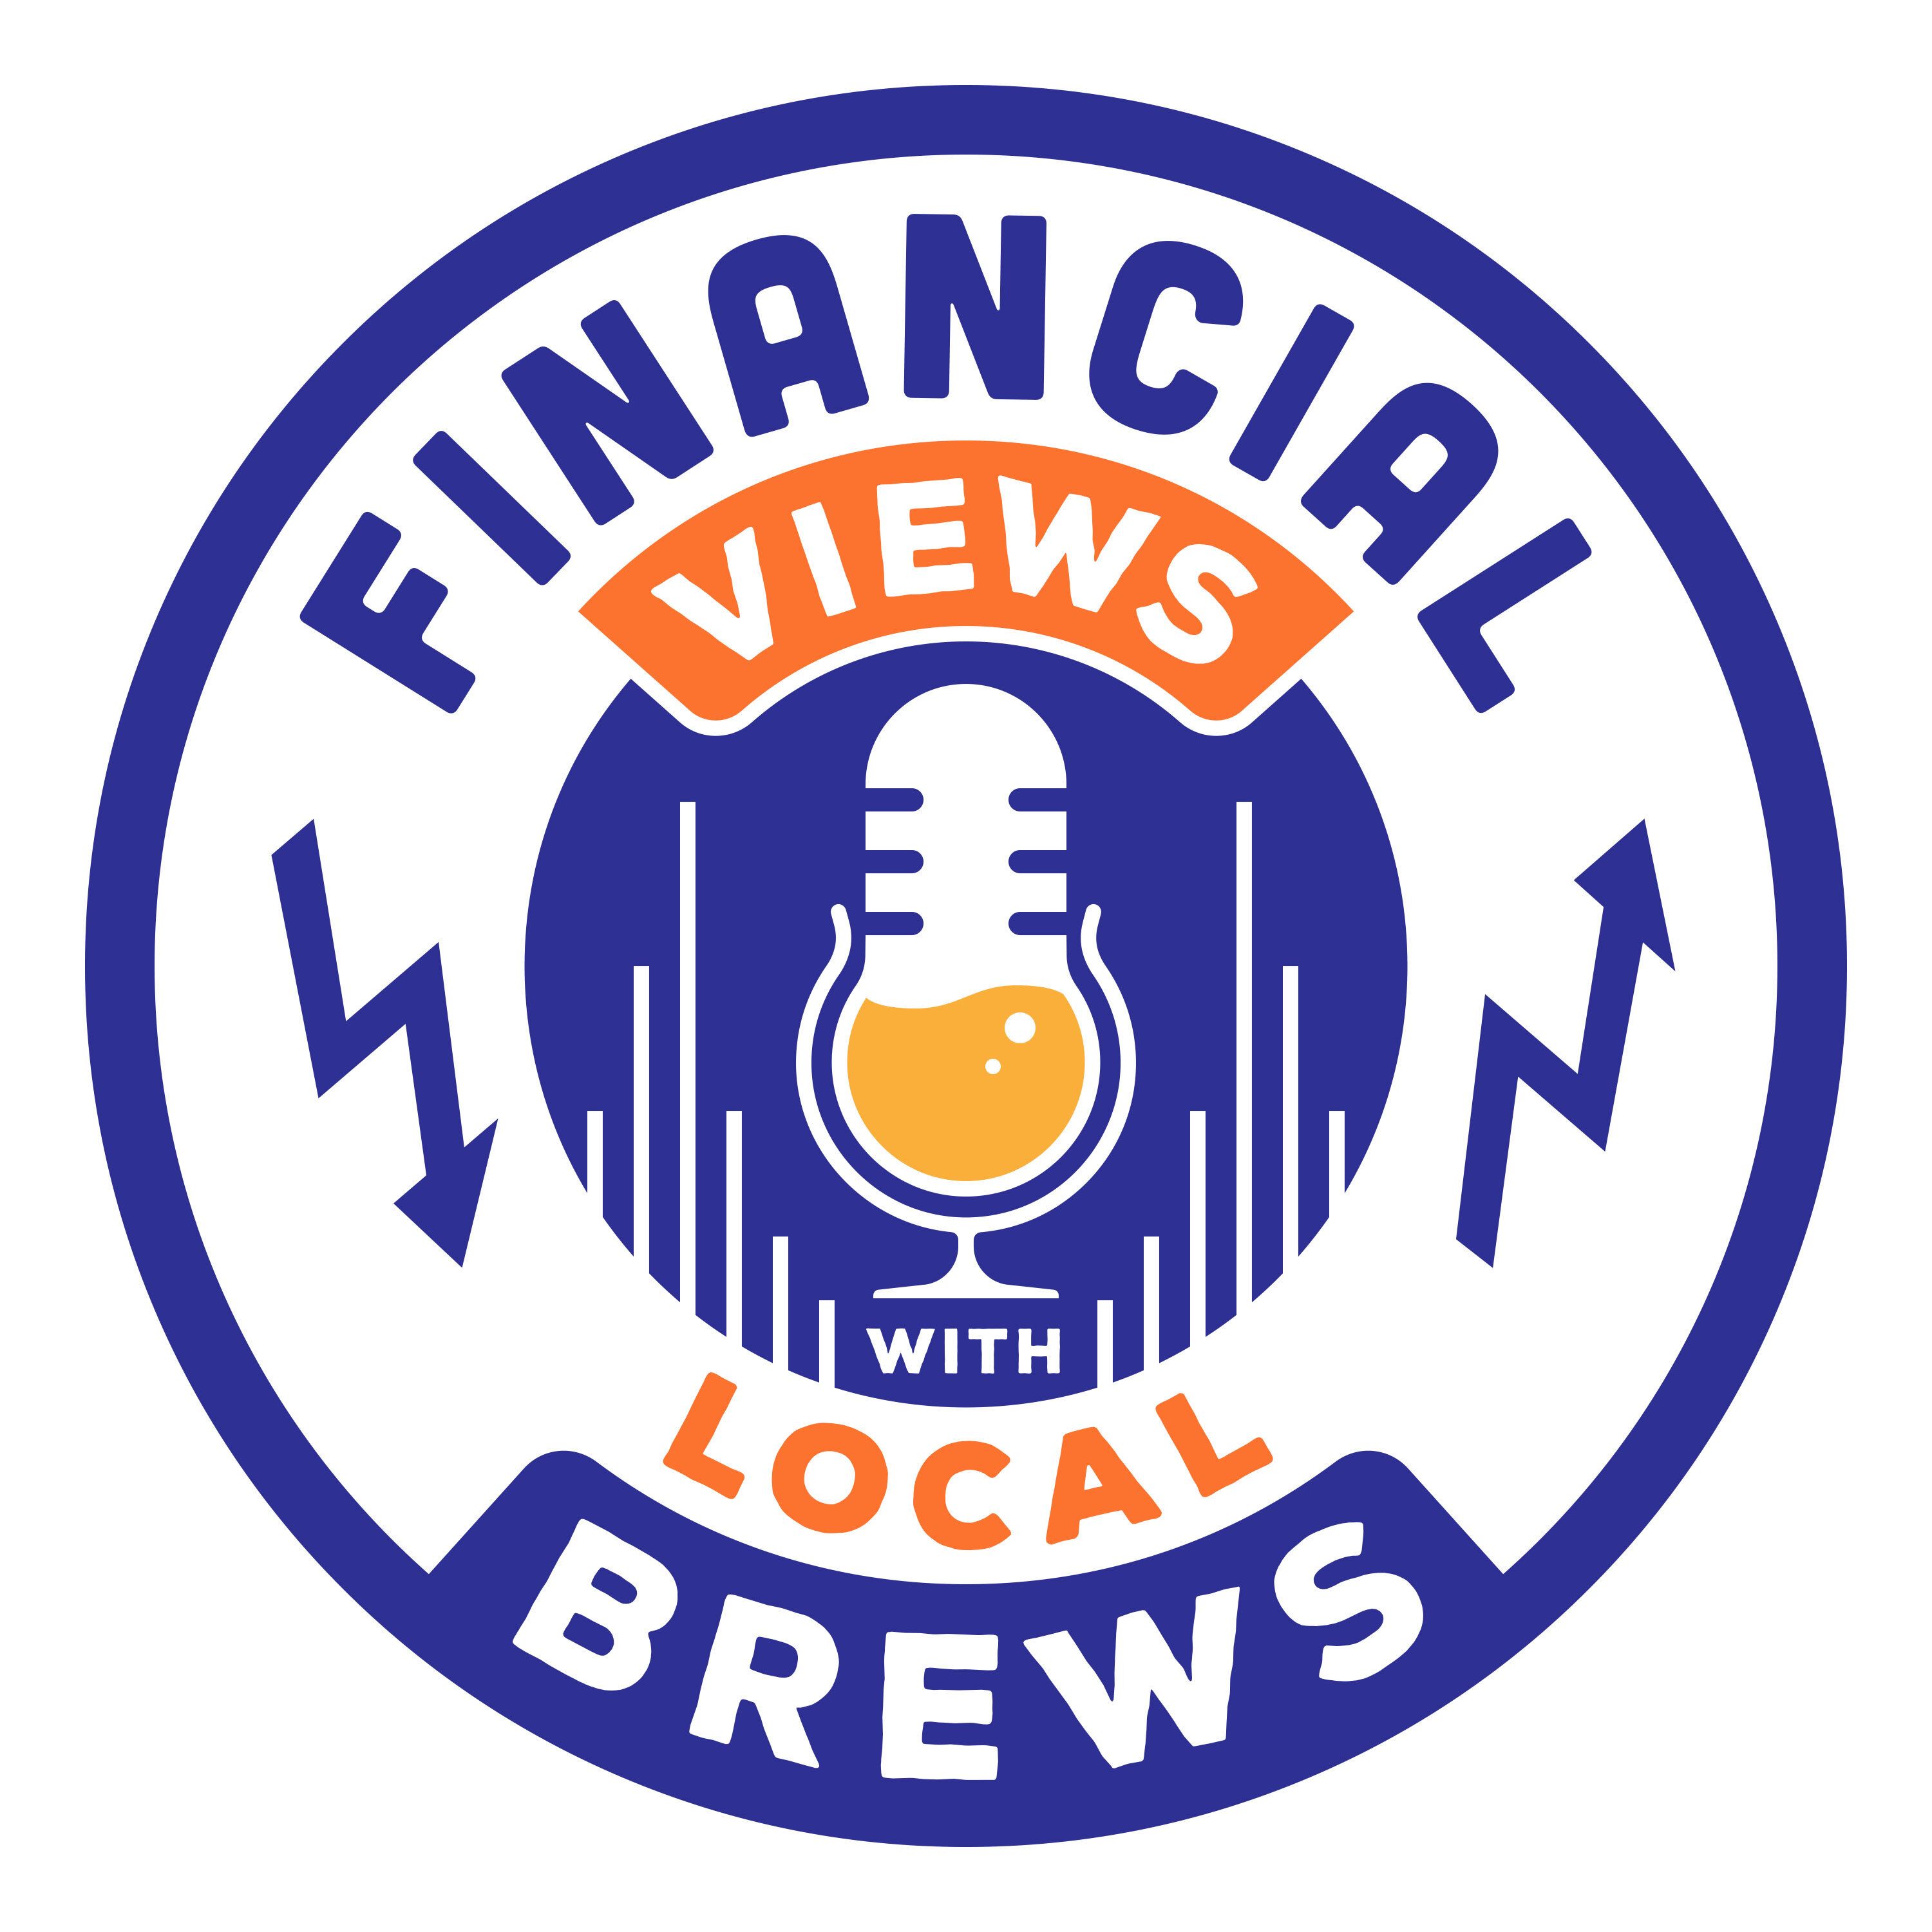 Financial Views with Local Brews